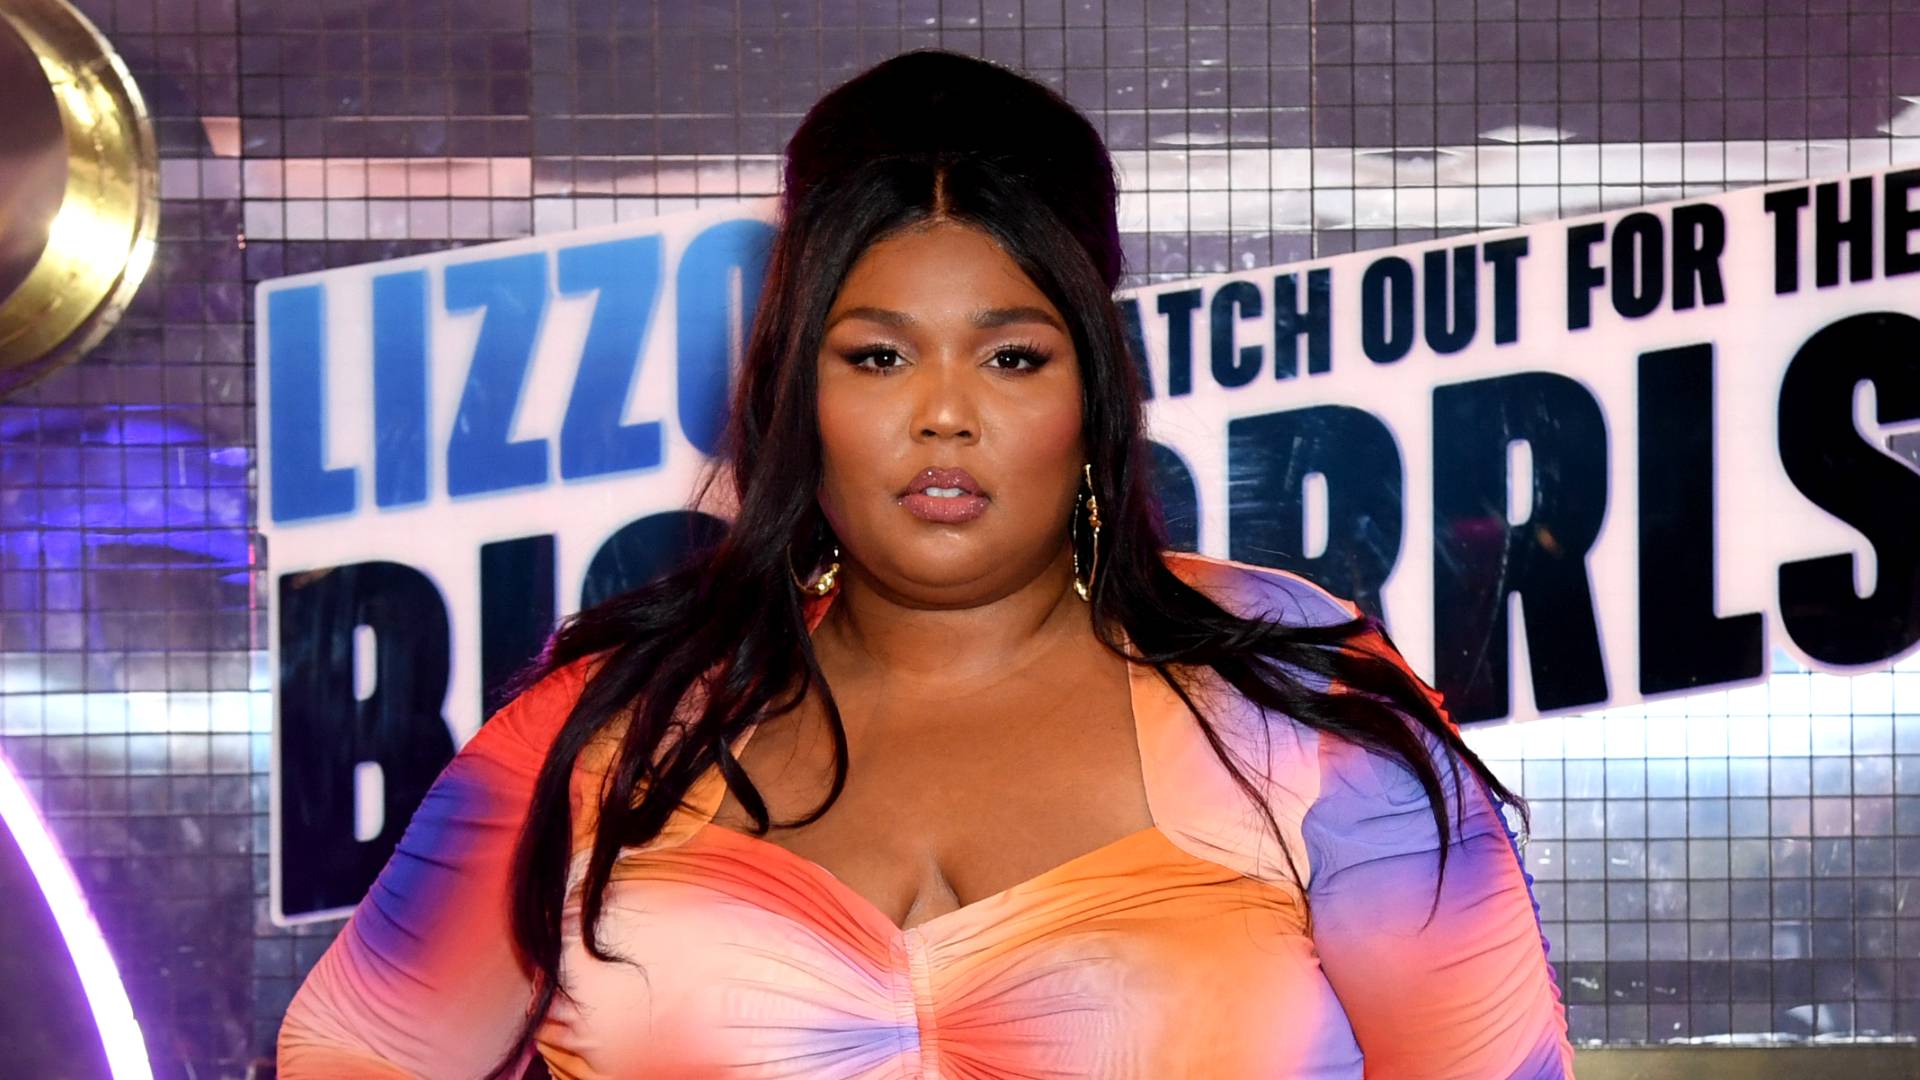 Lizzo attends Lizzo's Watch Out For The Big Grrls Watch Party at NeueHouse Los Angeles on March 25, 2022 in Hollywood, California. 